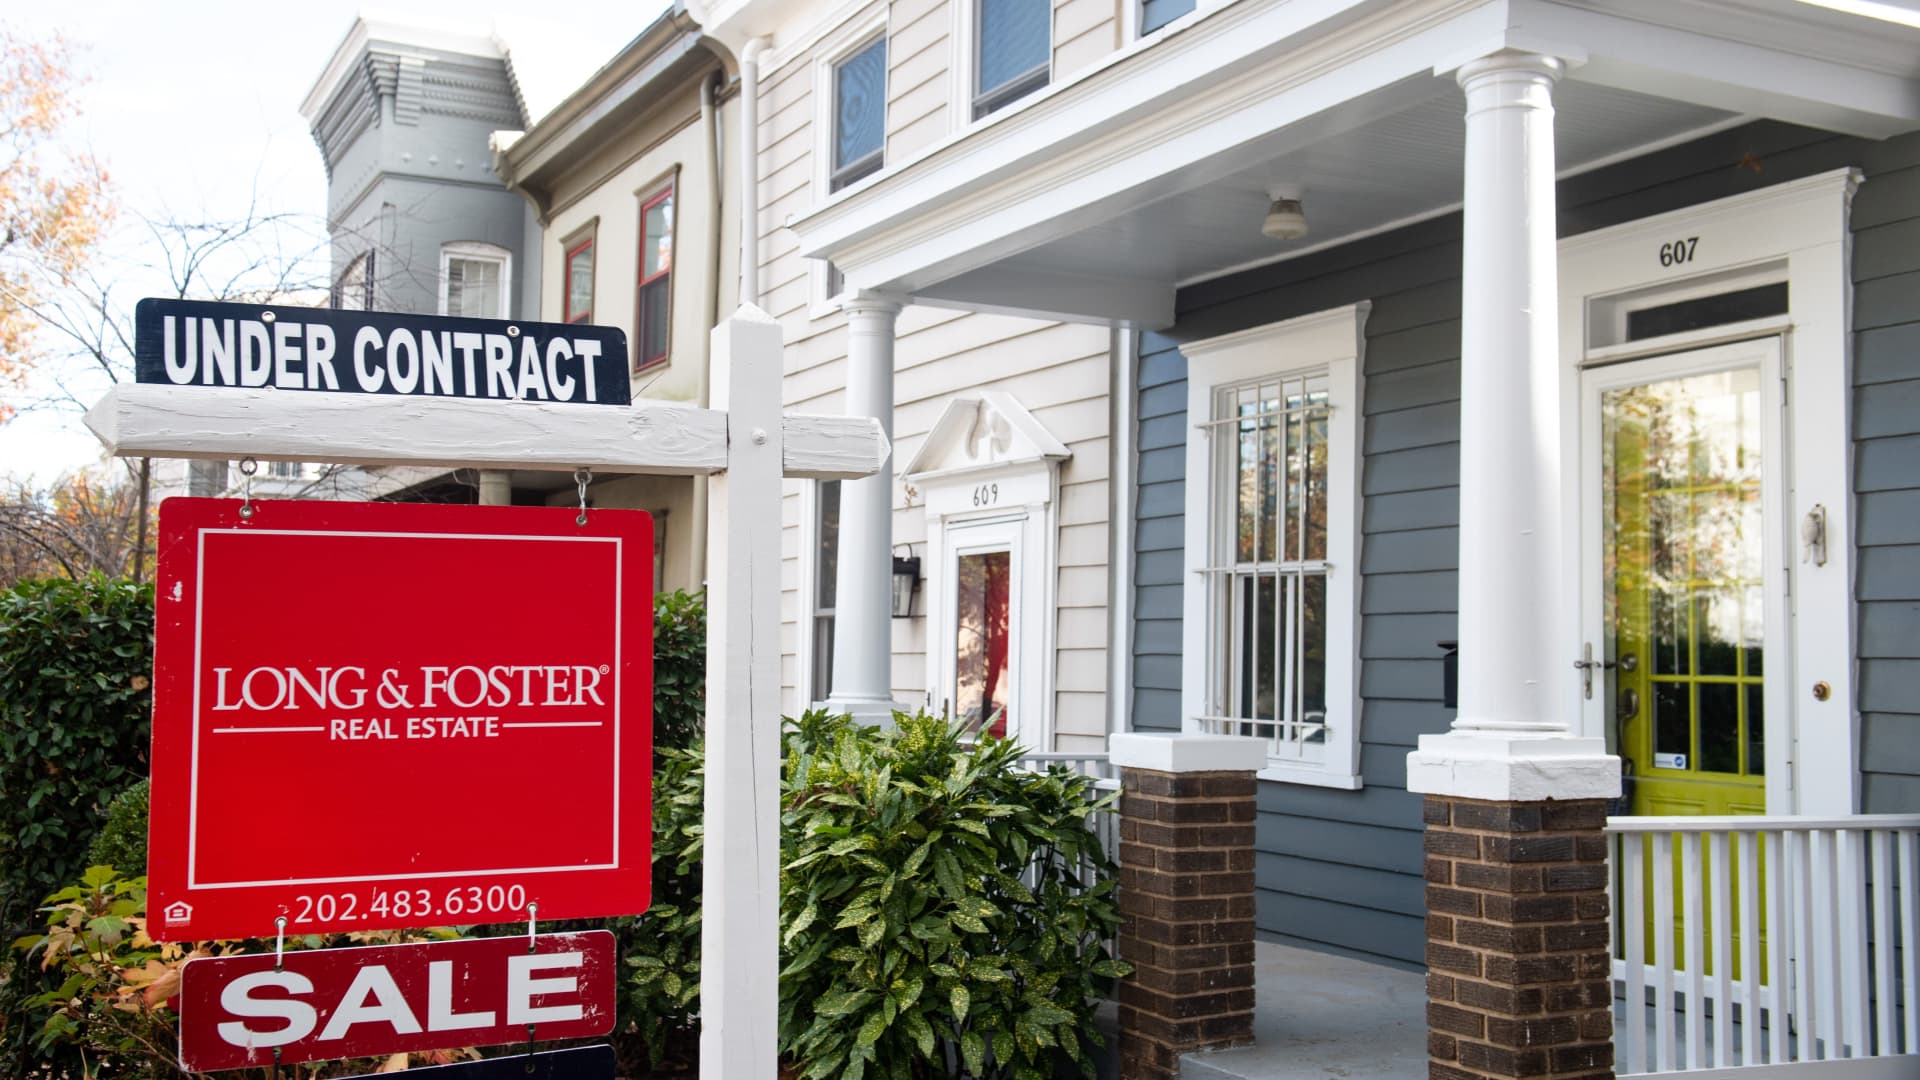 January pending home sales show rush of contracts